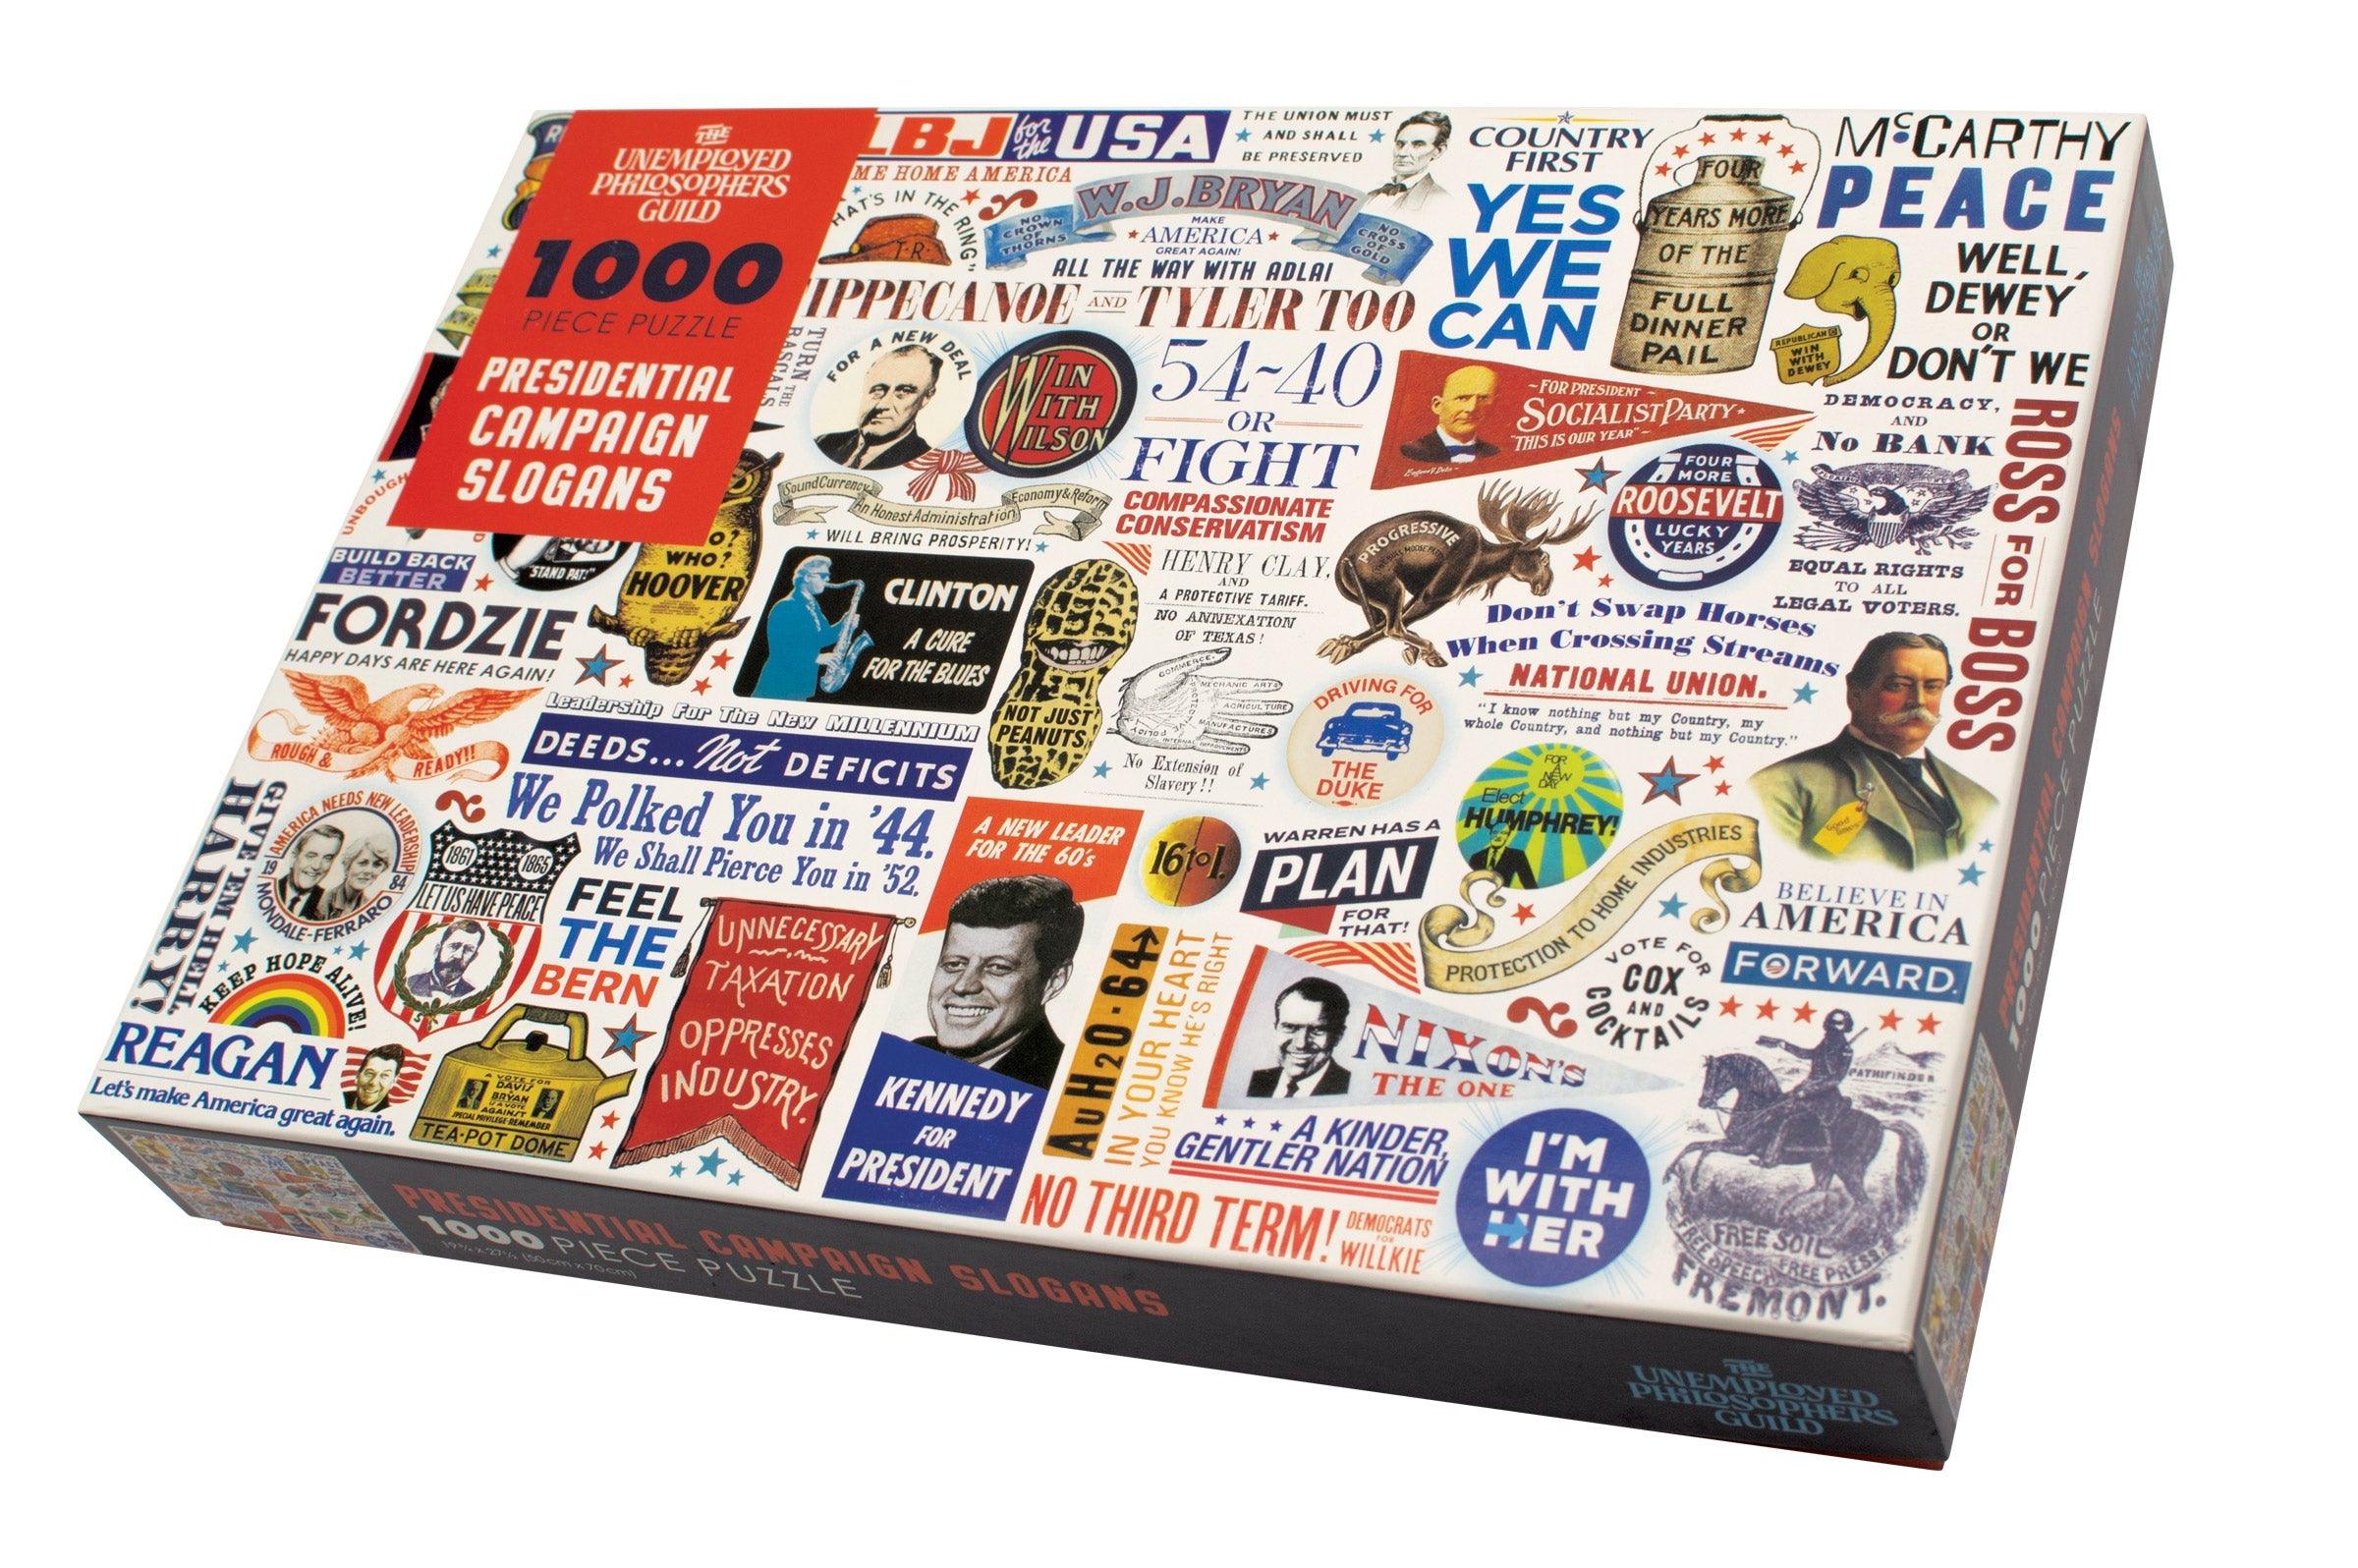 Product photo of Presidential Slogan Jigsaw Puzzle, a novelty gift manufactured by The Unemployed Philosophers Guild.